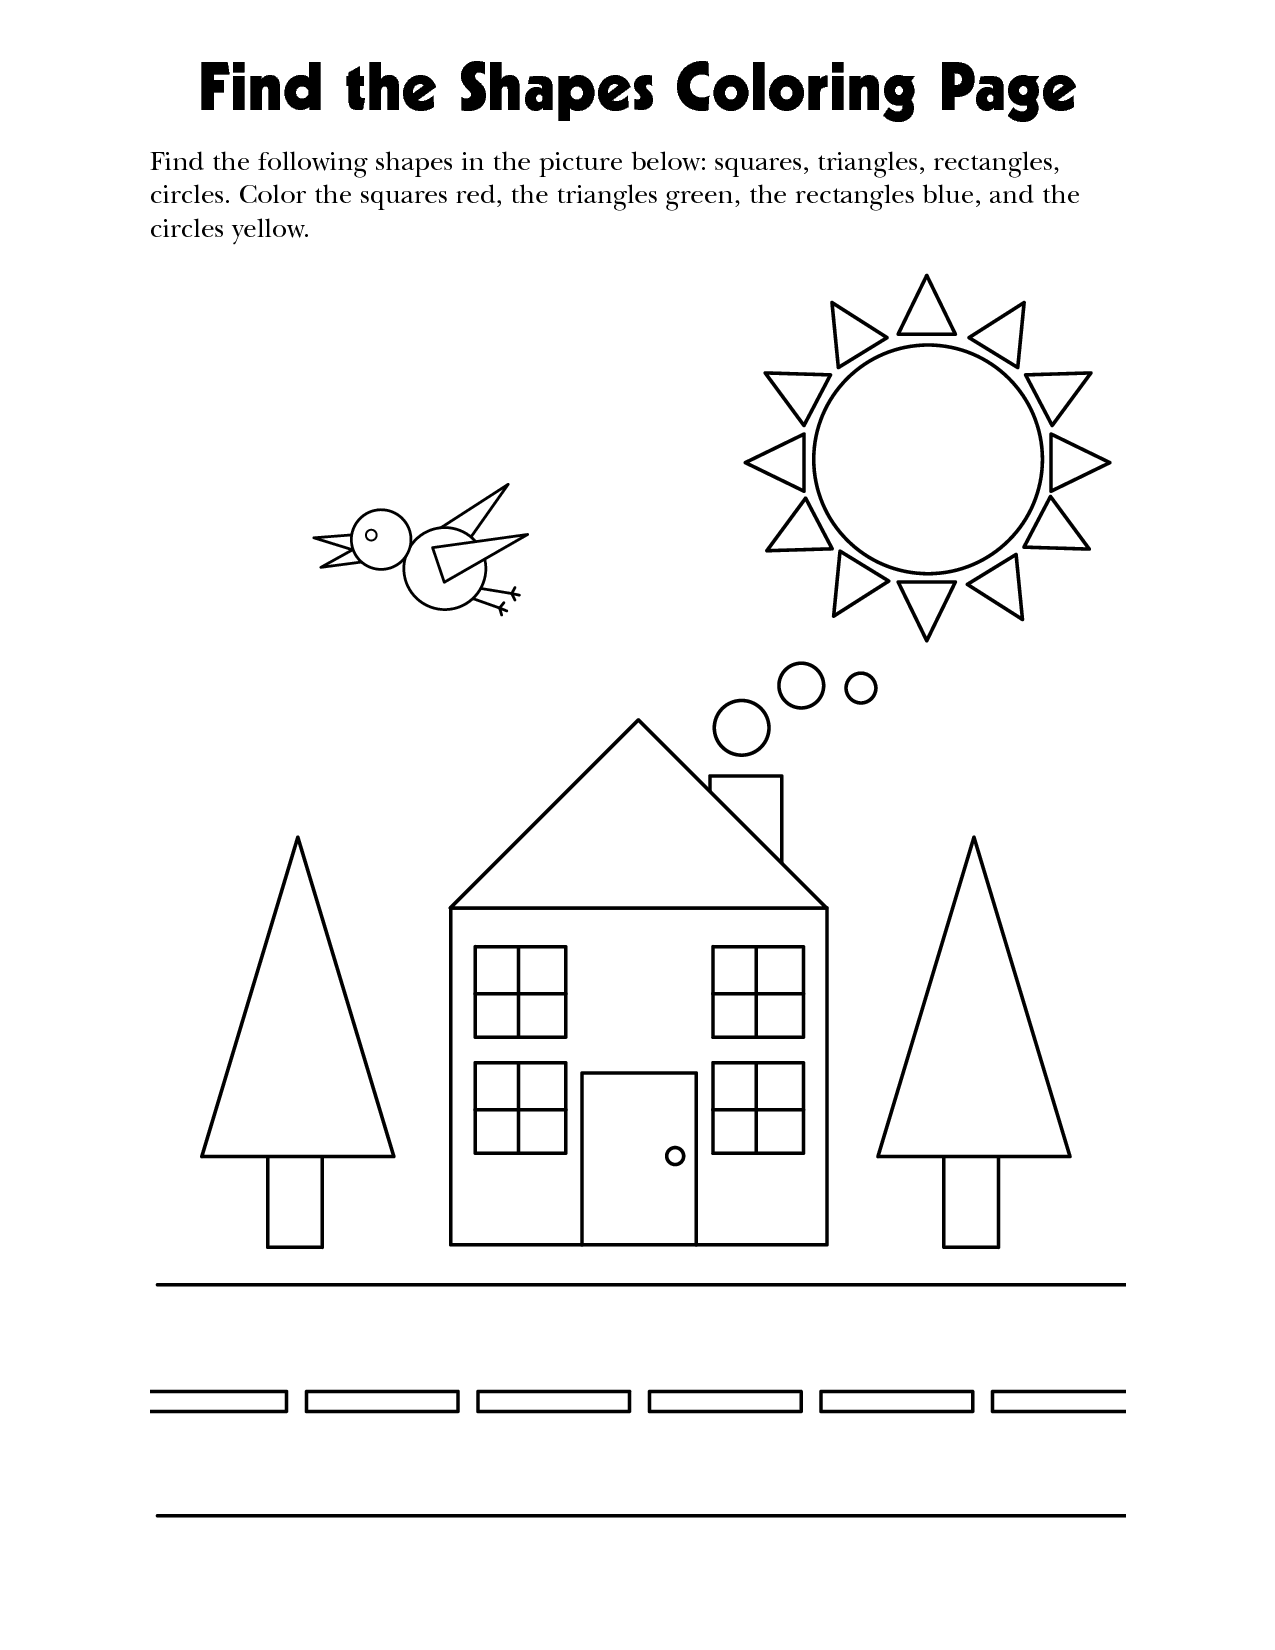 Find Shapes Coloring Pages Image